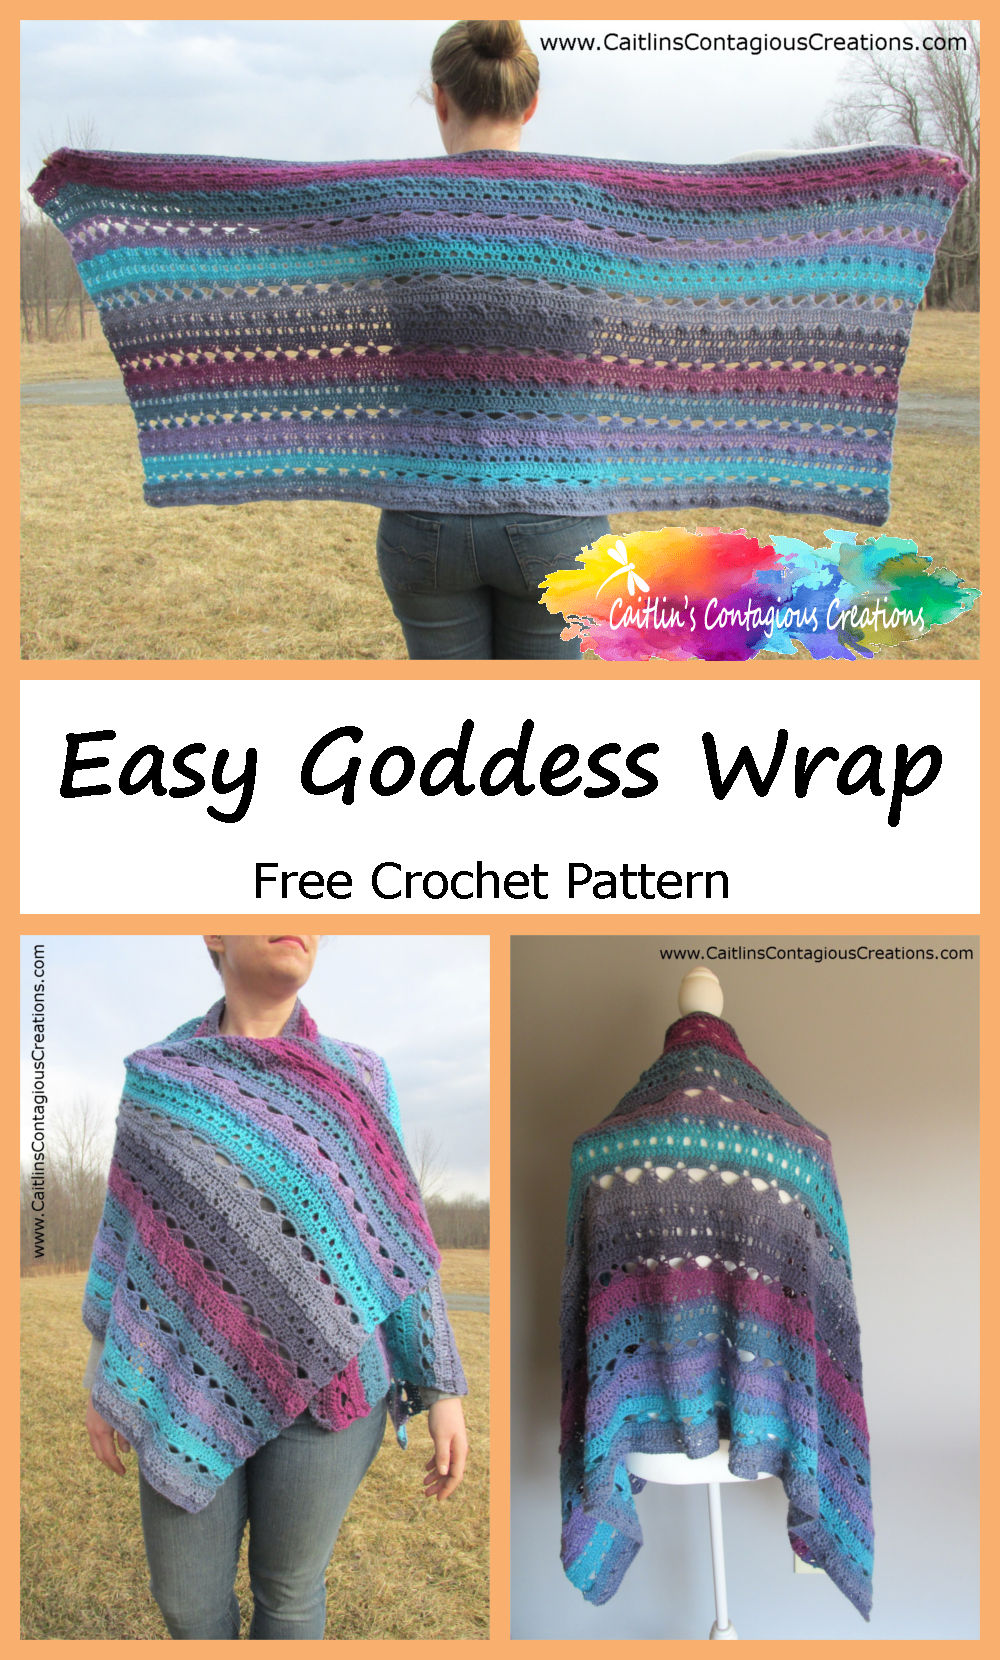 Easy Wrap Crochet Pattern from Caitlin's Contagious Creations. This free crochet design for a Greek Goddess prayer shawl is fun and quick. The pattern includes written directions and step by step photos. Start yours today! #FreeCrochetShawl #FreeCrochetWrap #WrapCrochetPattern